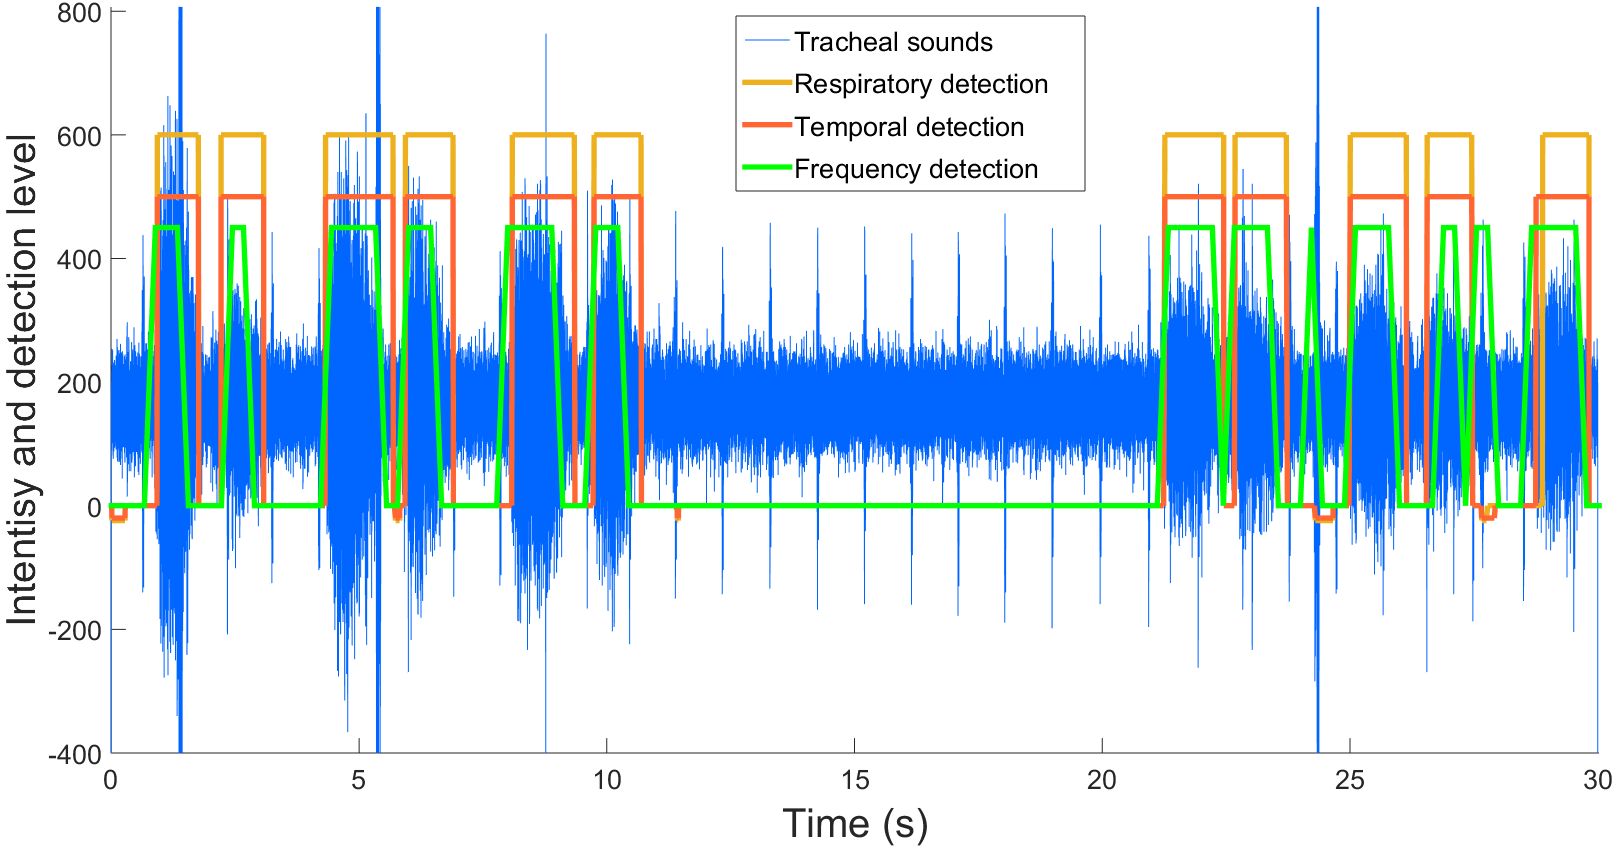 Results of the composed time and frequency domains respiratory phase detection. The results show slightly different classification from both domains that complete each others rather than conflicting.